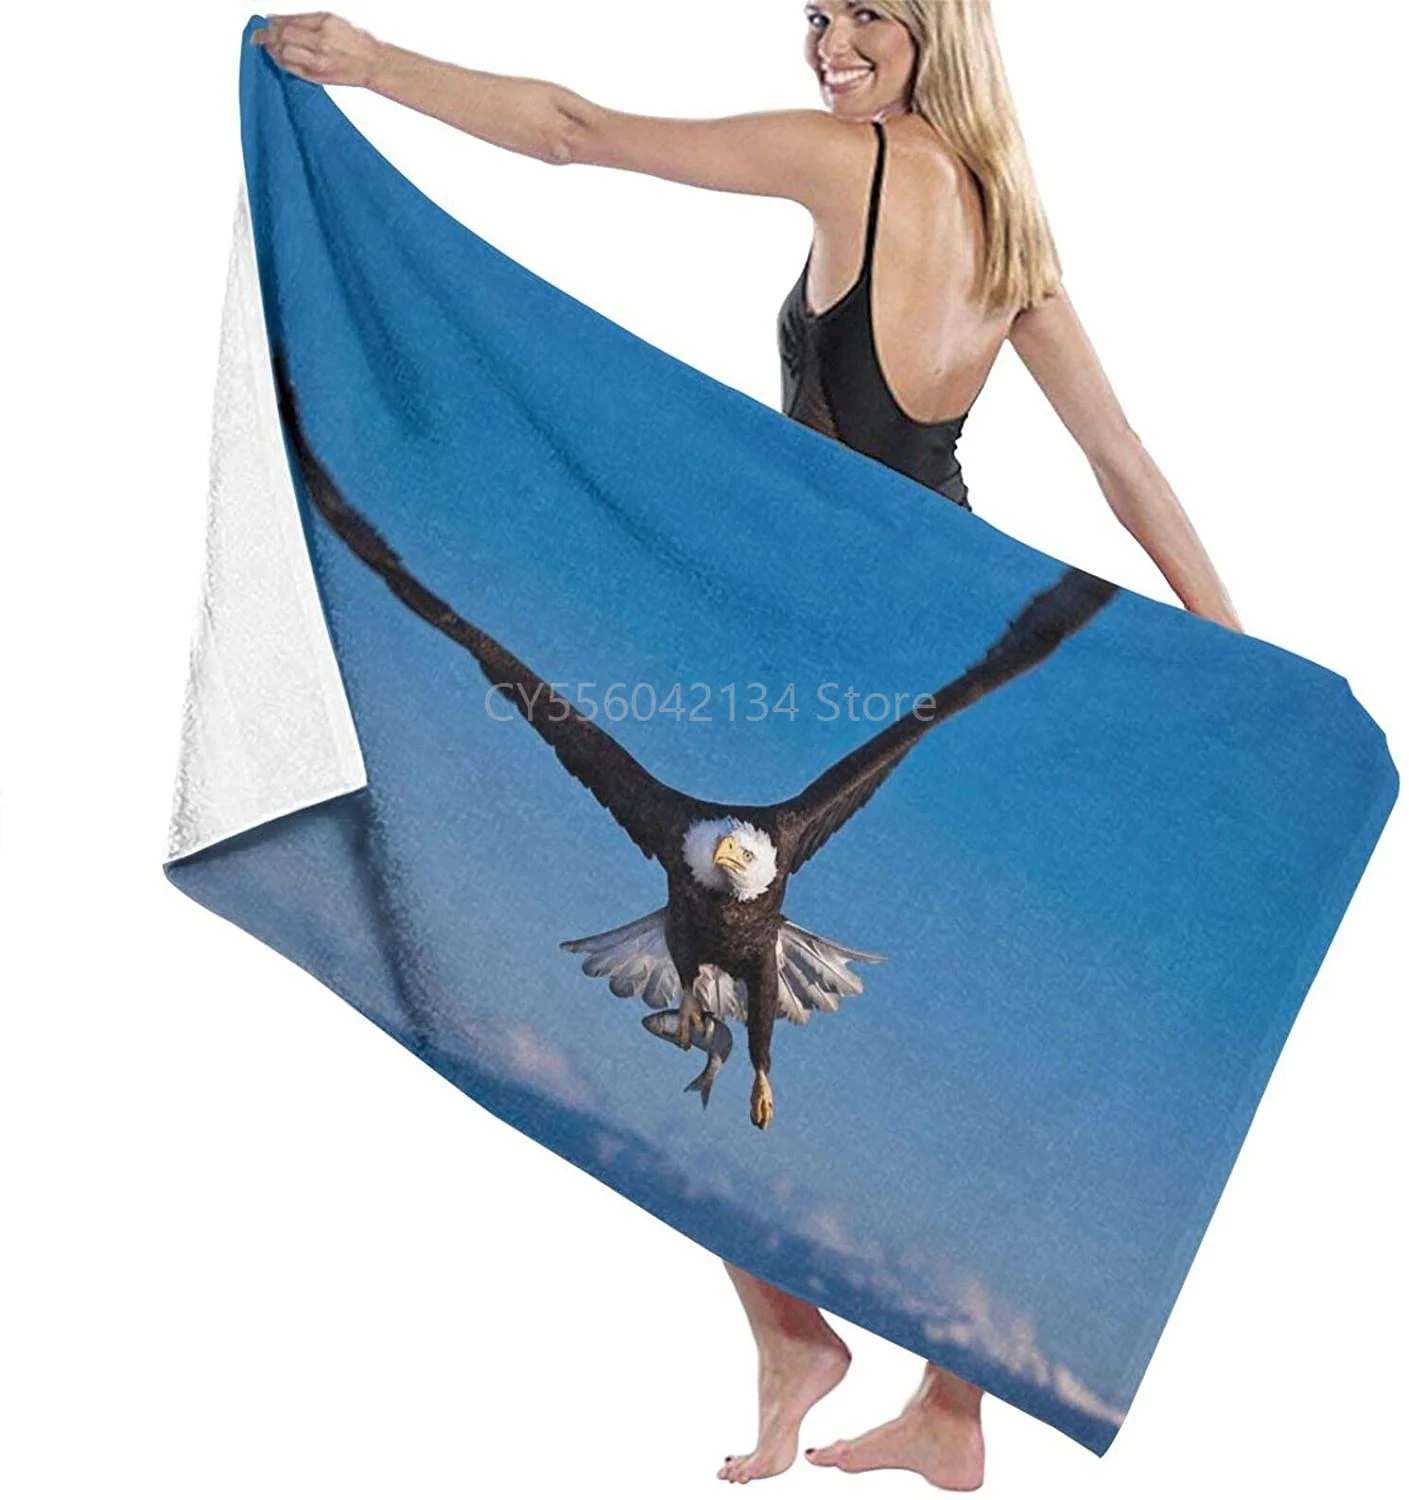 

Flying Eagle Widescreen Wallpapers Beach Towels Quick Dry Super Absorbent Bathing Spa Pool Towels for Swimming Outdoor 80x130cm